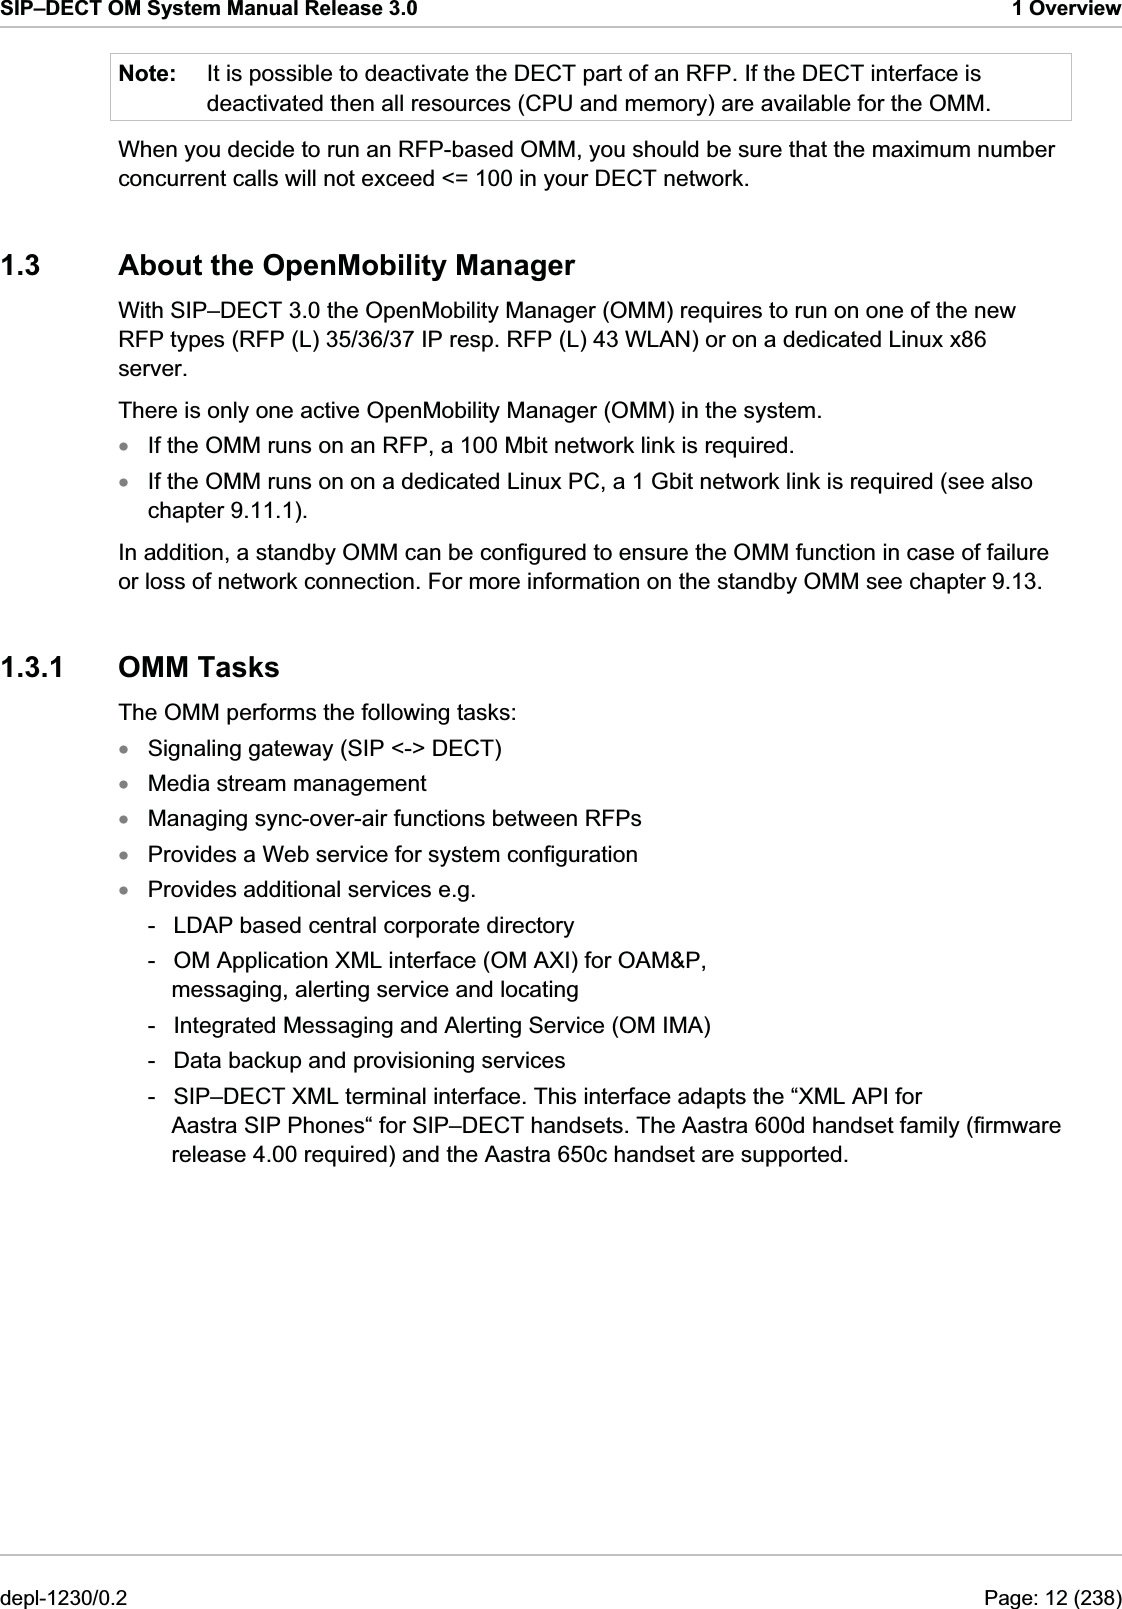 SIP–DECT OM System Manual Release 3.0  1 Overview Note:  It is possible to deactivate the DECT part of an RFP. If the DECT interface is deactivated then all resources (CPU and memory) are available for the OMM.  When you decide to run an RFP-based OMM, you should be sure that the maximum number concurrent calls will not exceed &lt;= 100 in your DECT network. 1.3  About the OpenMobility Manager With SIP–DECT 3.0 the OpenMobility Manager (OMM) requires to run on one of the new RFP types (RFP (L) 35/36/37 IP resp. RFP (L) 43 WLAN) or on a dedicated Linux x86 server. There is only one active OpenMobility Manager (OMM) in the system.  If the OMM runs on an RFP, a 100 Mbit network link is required. xxxxxxxIf the OMM runs on on a dedicated Linux PC, a 1 Gbit network link is required (see also chapter 9.11.1). In addition, a standby OMM can be configured to ensure the OMM function in case of failure or loss of network connection. For more information on the standby OMM see chapter 9.13.  1.3.1 OMM Tasks The OMM performs the following tasks:  Signaling gateway (SIP &lt;-&gt; DECT)  Media stream management  Managing sync-over-air functions between RFPs  Provides a Web service for system configuration  Provides additional services e.g.  -  LDAP based central corporate directory  -  OM Application XML interface (OM AXI) for OAM&amp;P, messaging, alerting service and locating  -  Integrated Messaging and Alerting Service (OM IMA)  -  Data backup and provisioning services  -  SIP–DECT XML terminal interface. This interface adapts the “XML API for Aastra SIP Phones“ for SIP–DECT handsets. The Aastra 600d handset family (firmware release 4.00 required) and the Aastra 650c handset are supported.  depl-1230/0.2  Page: 12 (238) 